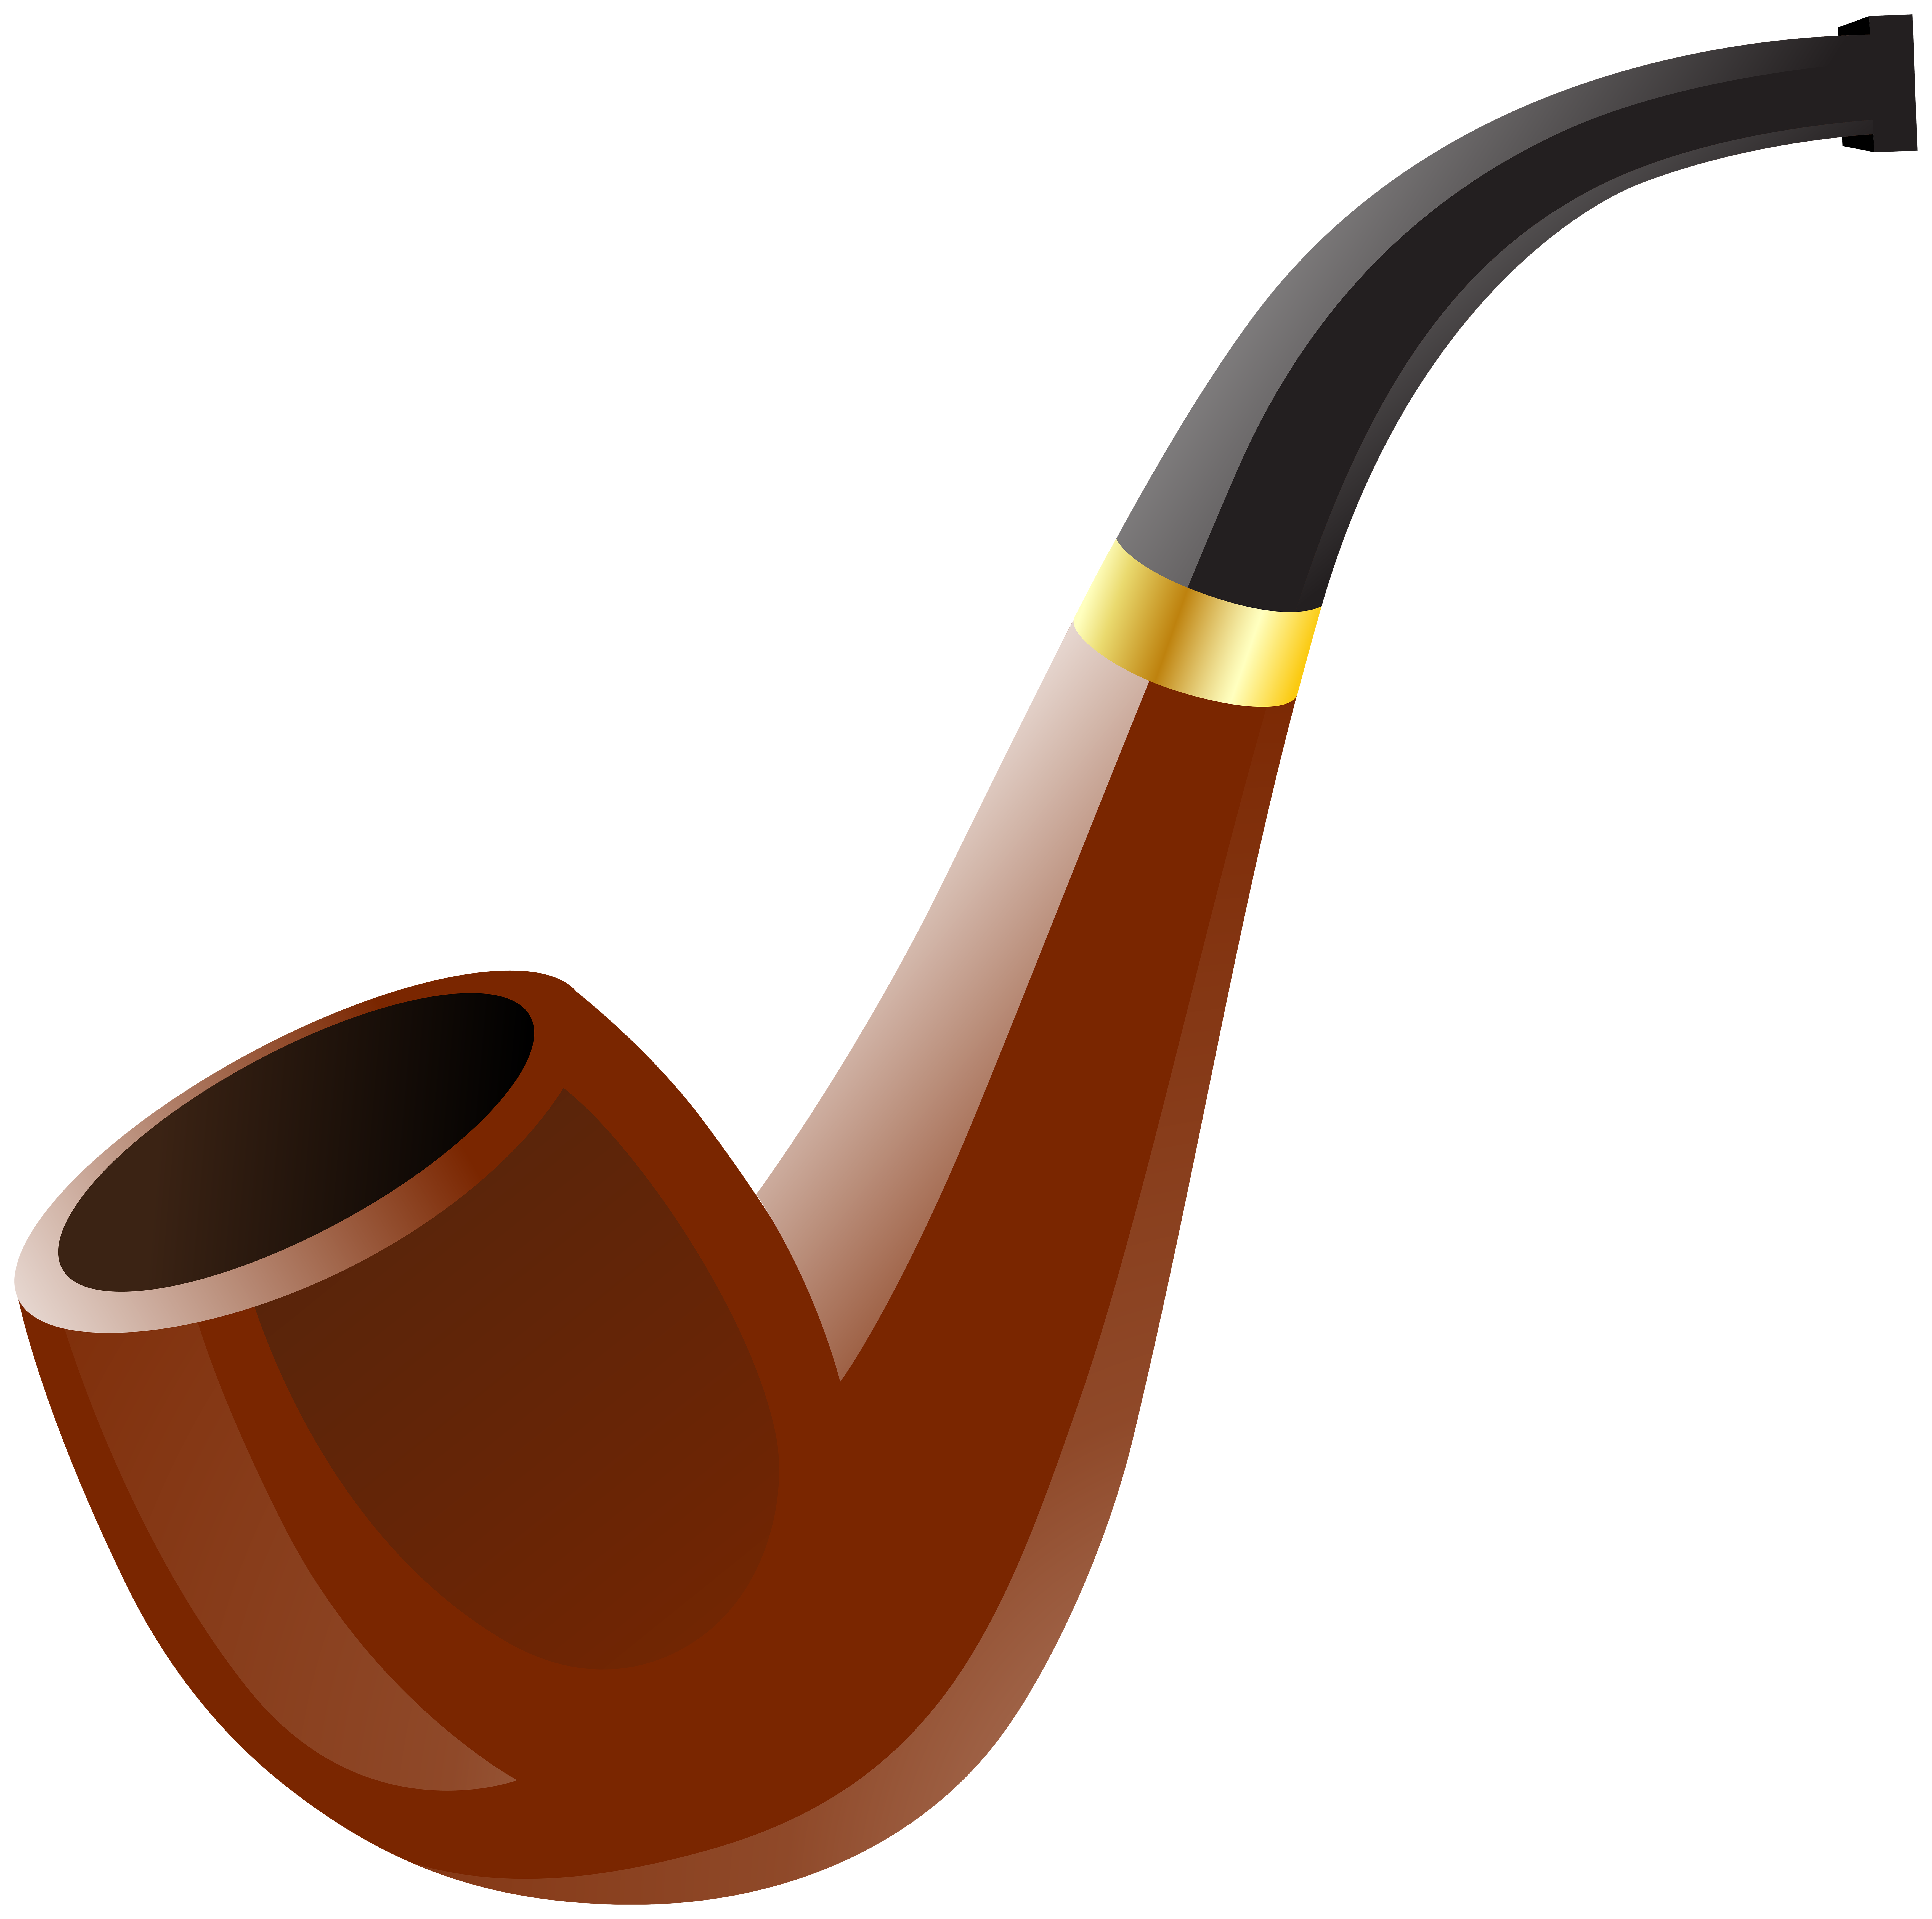 ... Tobacco Pipe - This is a 